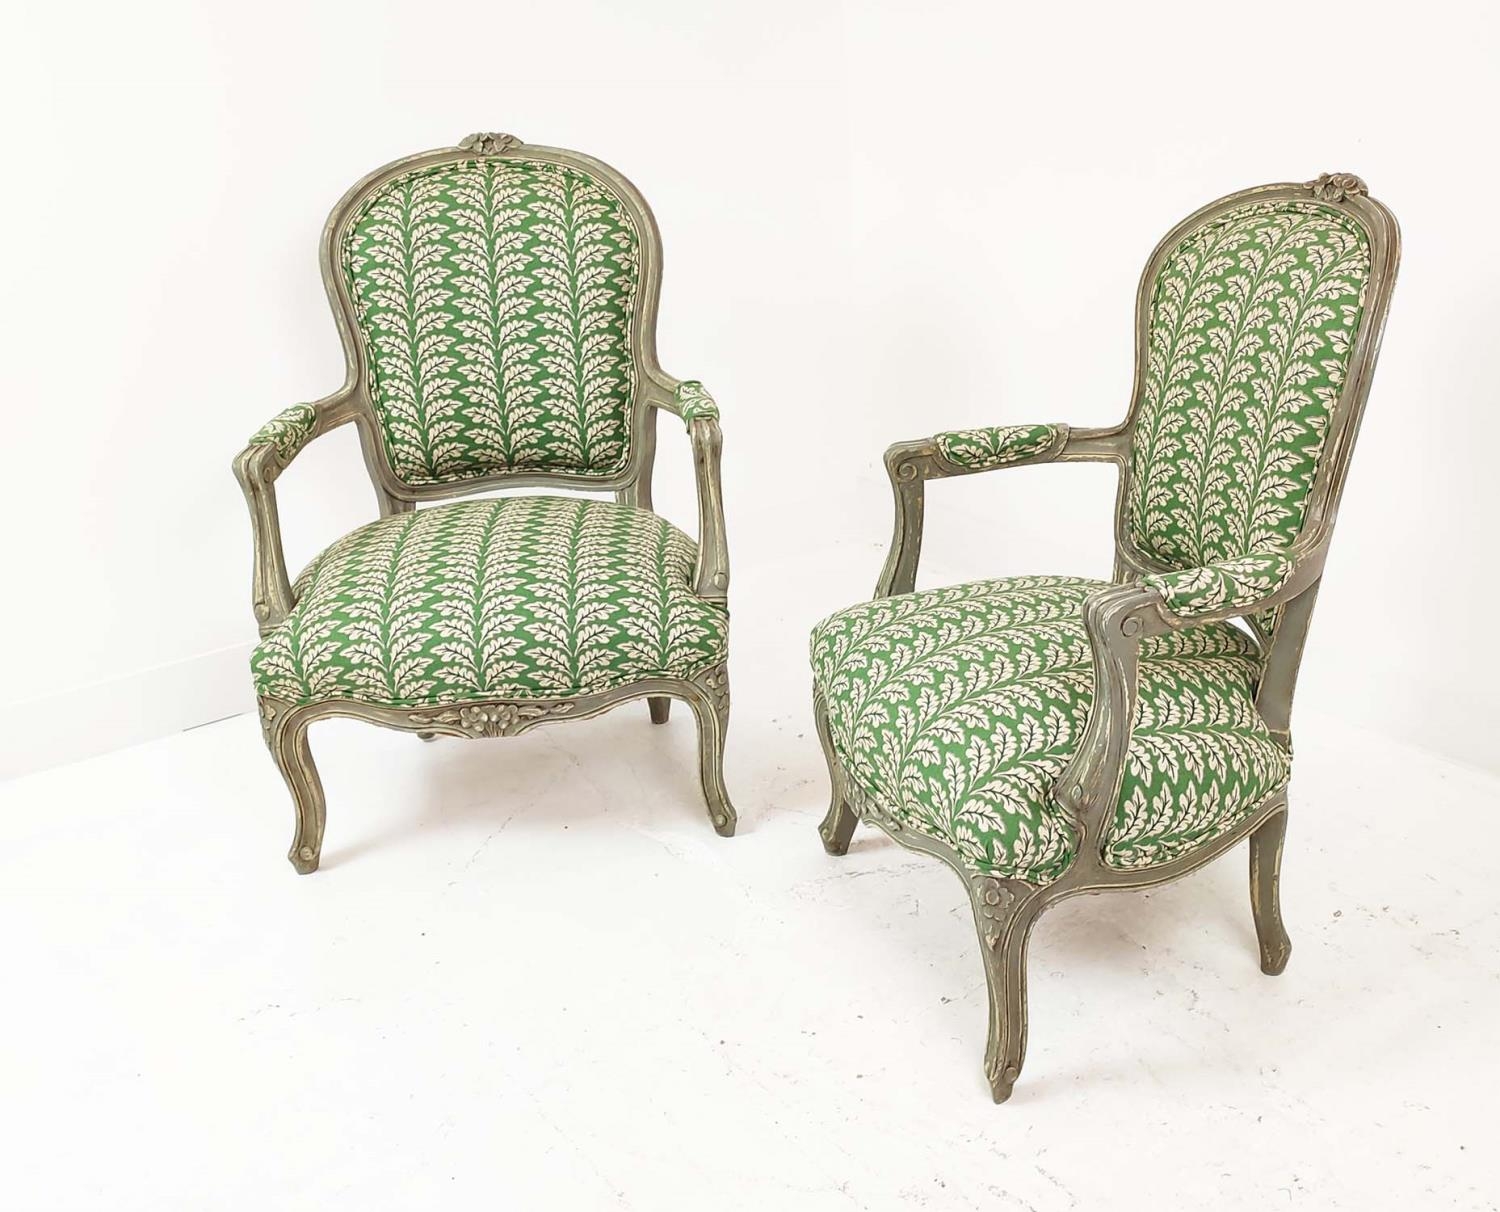 FAUTEUILS, a pair, Louis XV style, grey painted with green leaf patterned upholstery, 92cm H x - Image 2 of 8